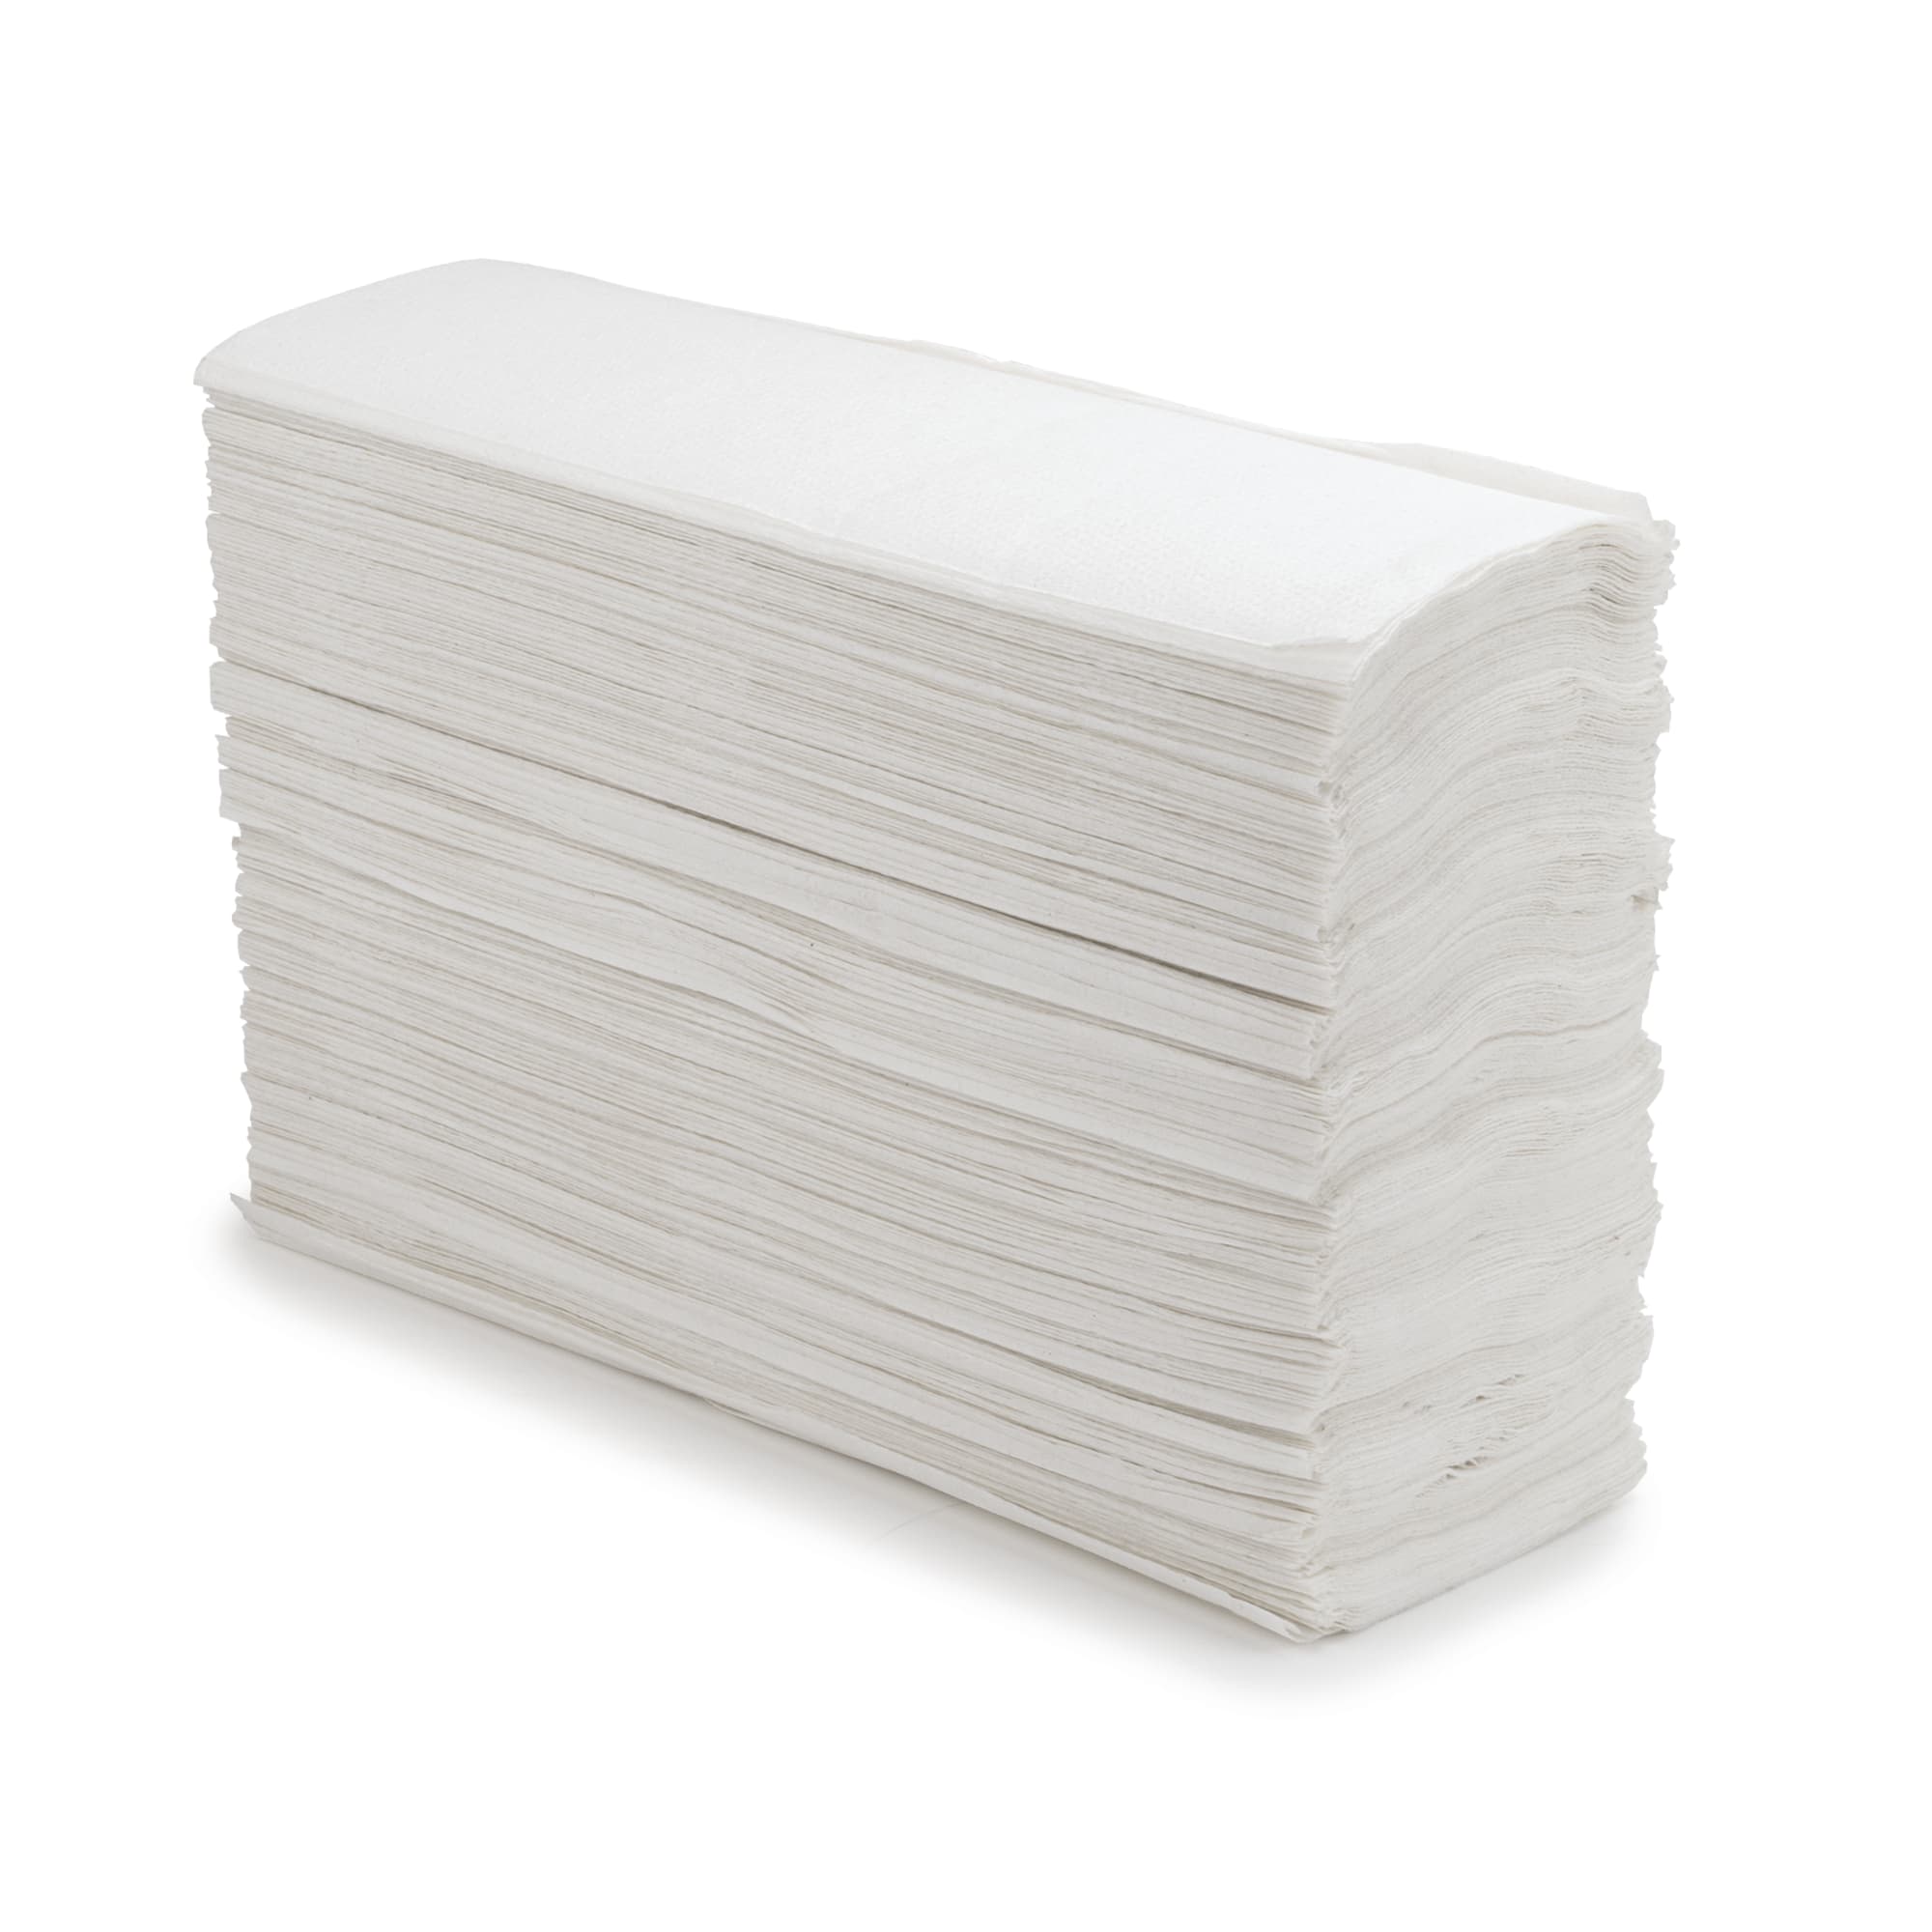 multifold towels commercial paper towel dispenserpaper towel Hand Paper CFold Bathroom paper cfoldpapertowel White Napkins Restaurant Supplies Paper Napkins Napkins Household Supplies Durable Napkins Janitorial C-fold towel 1 ply